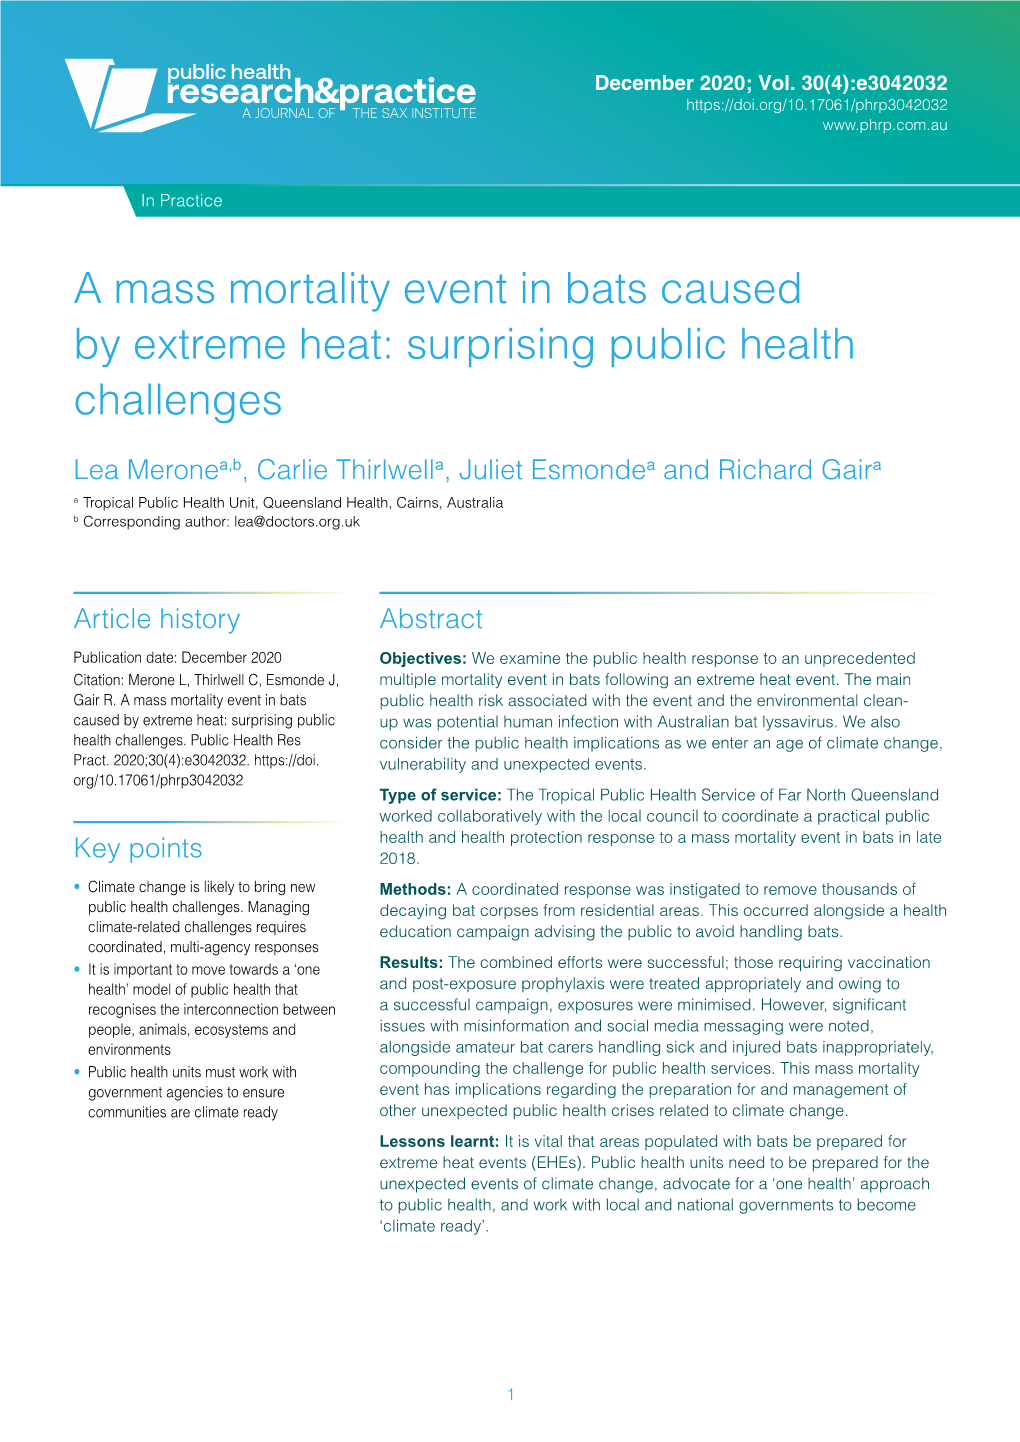 A Mass Mortality Event in Bats Caused by Extreme Heat: Surprising Public Health Challenges